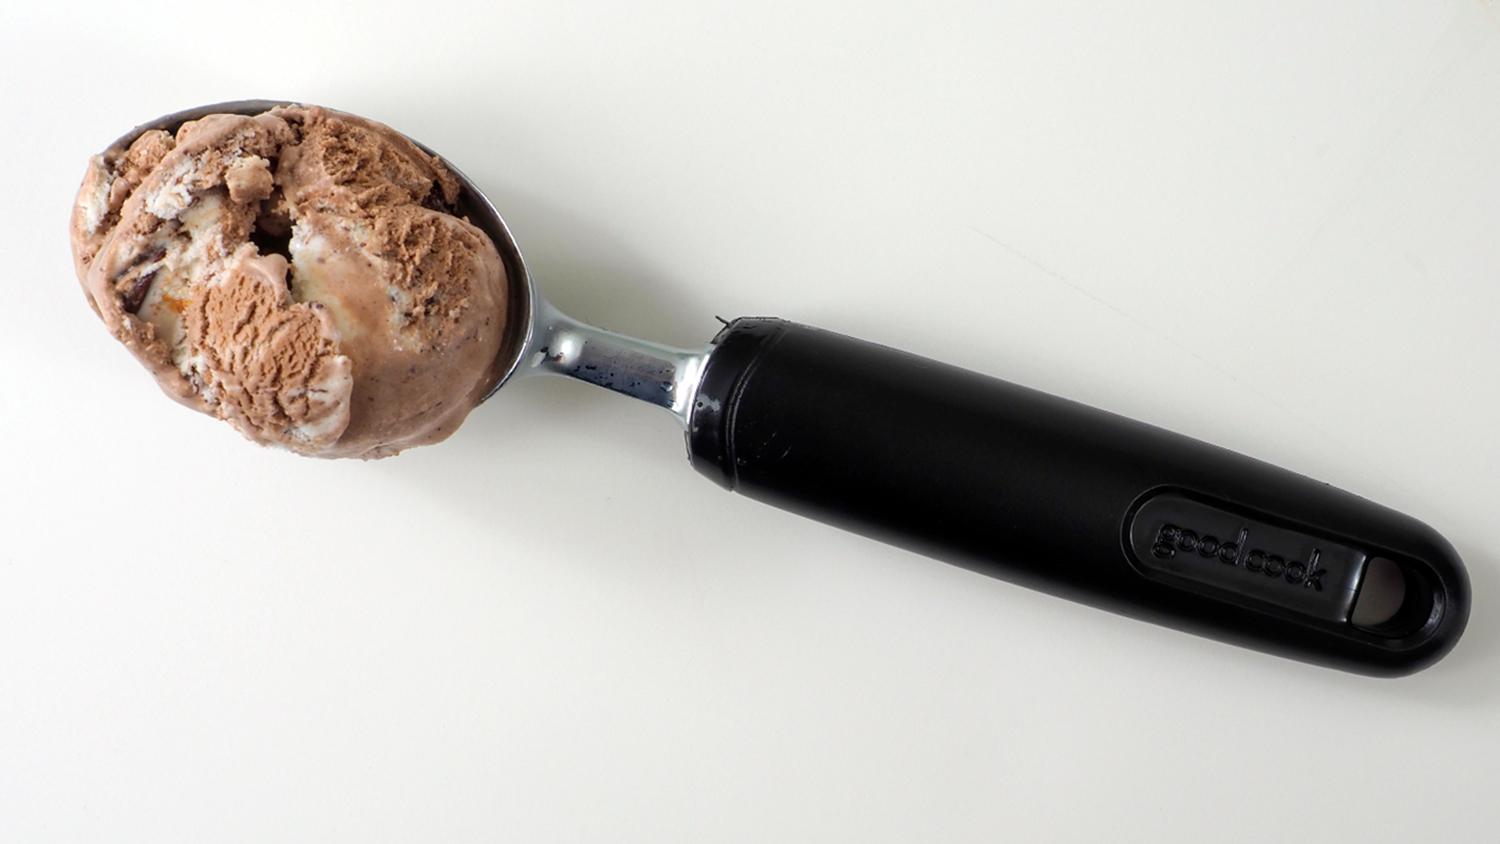 A scoop of Wolf Tracks ice cream on a scooper